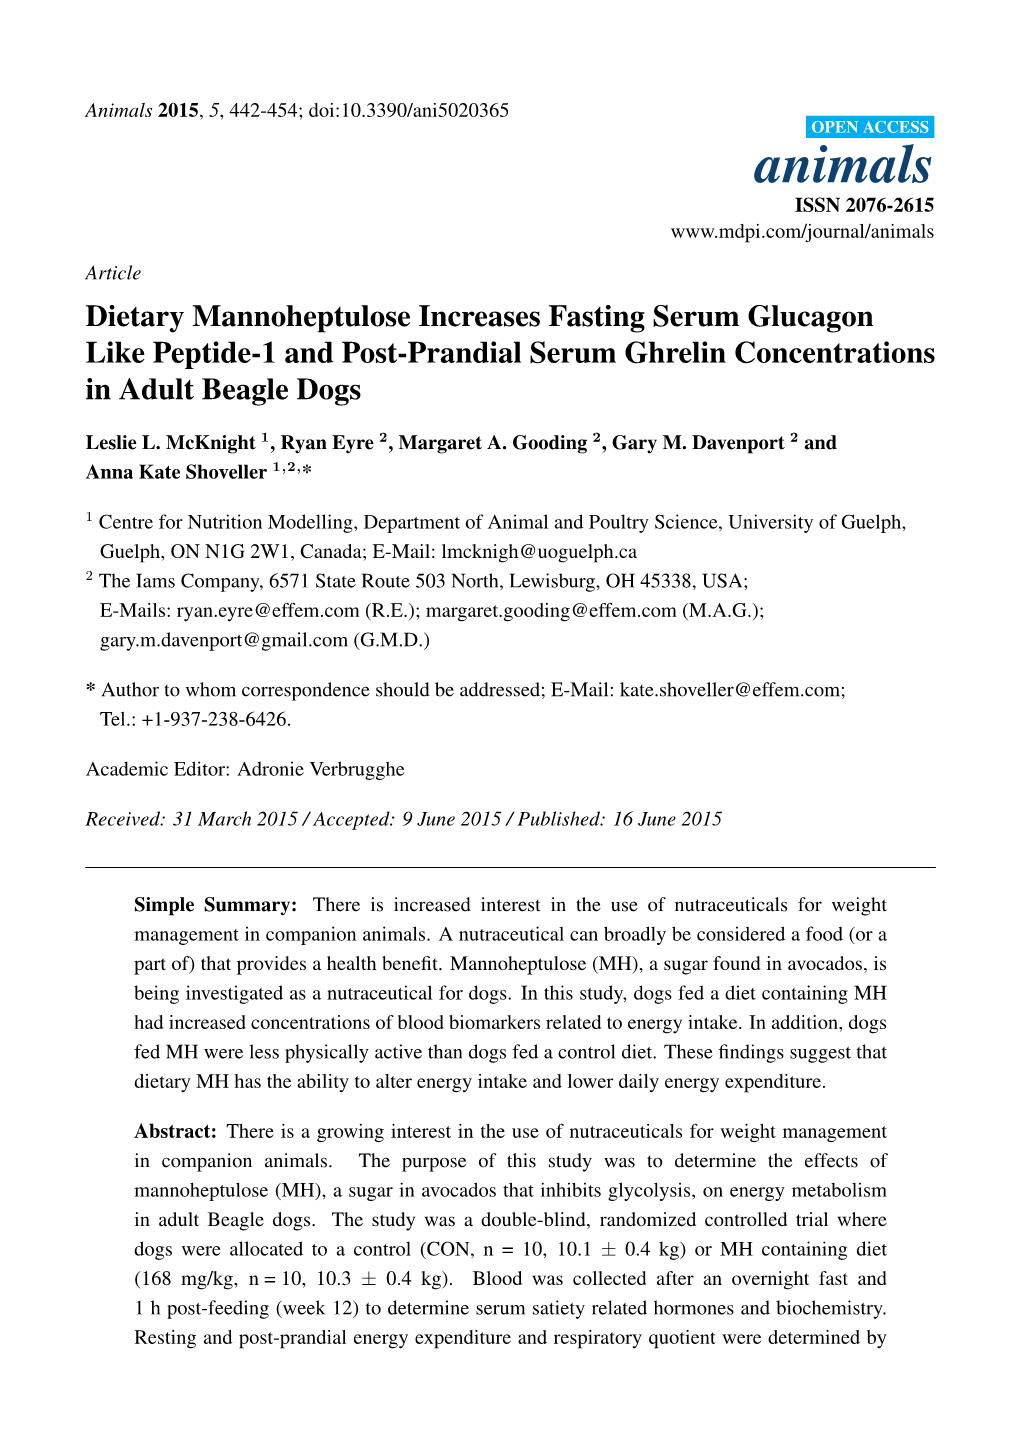 Dietary Mannoheptulose Increases Fasting Serum Glucagon Like Peptide-1 and Post-Prandial Serum Ghrelin Concentrations in Adult Beagle Dogs